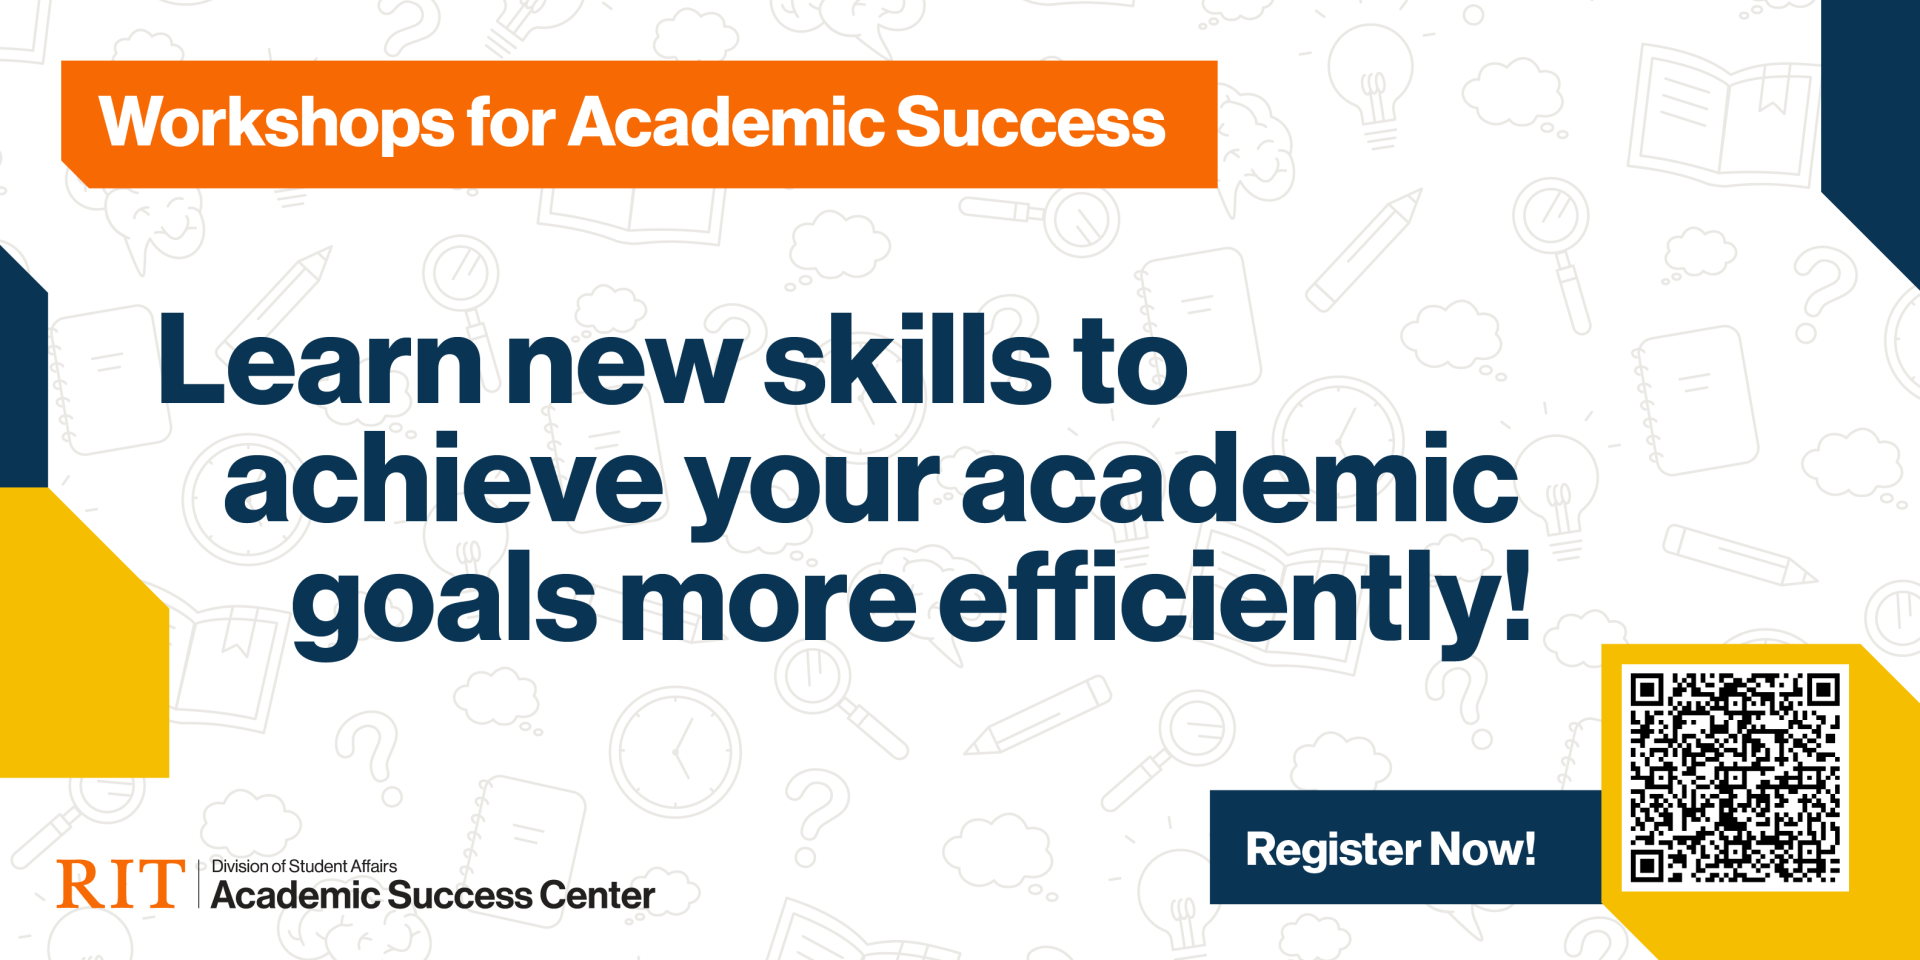 Workshops for Academic Success: Learn new skills to achieve you academic goals more efficiently!